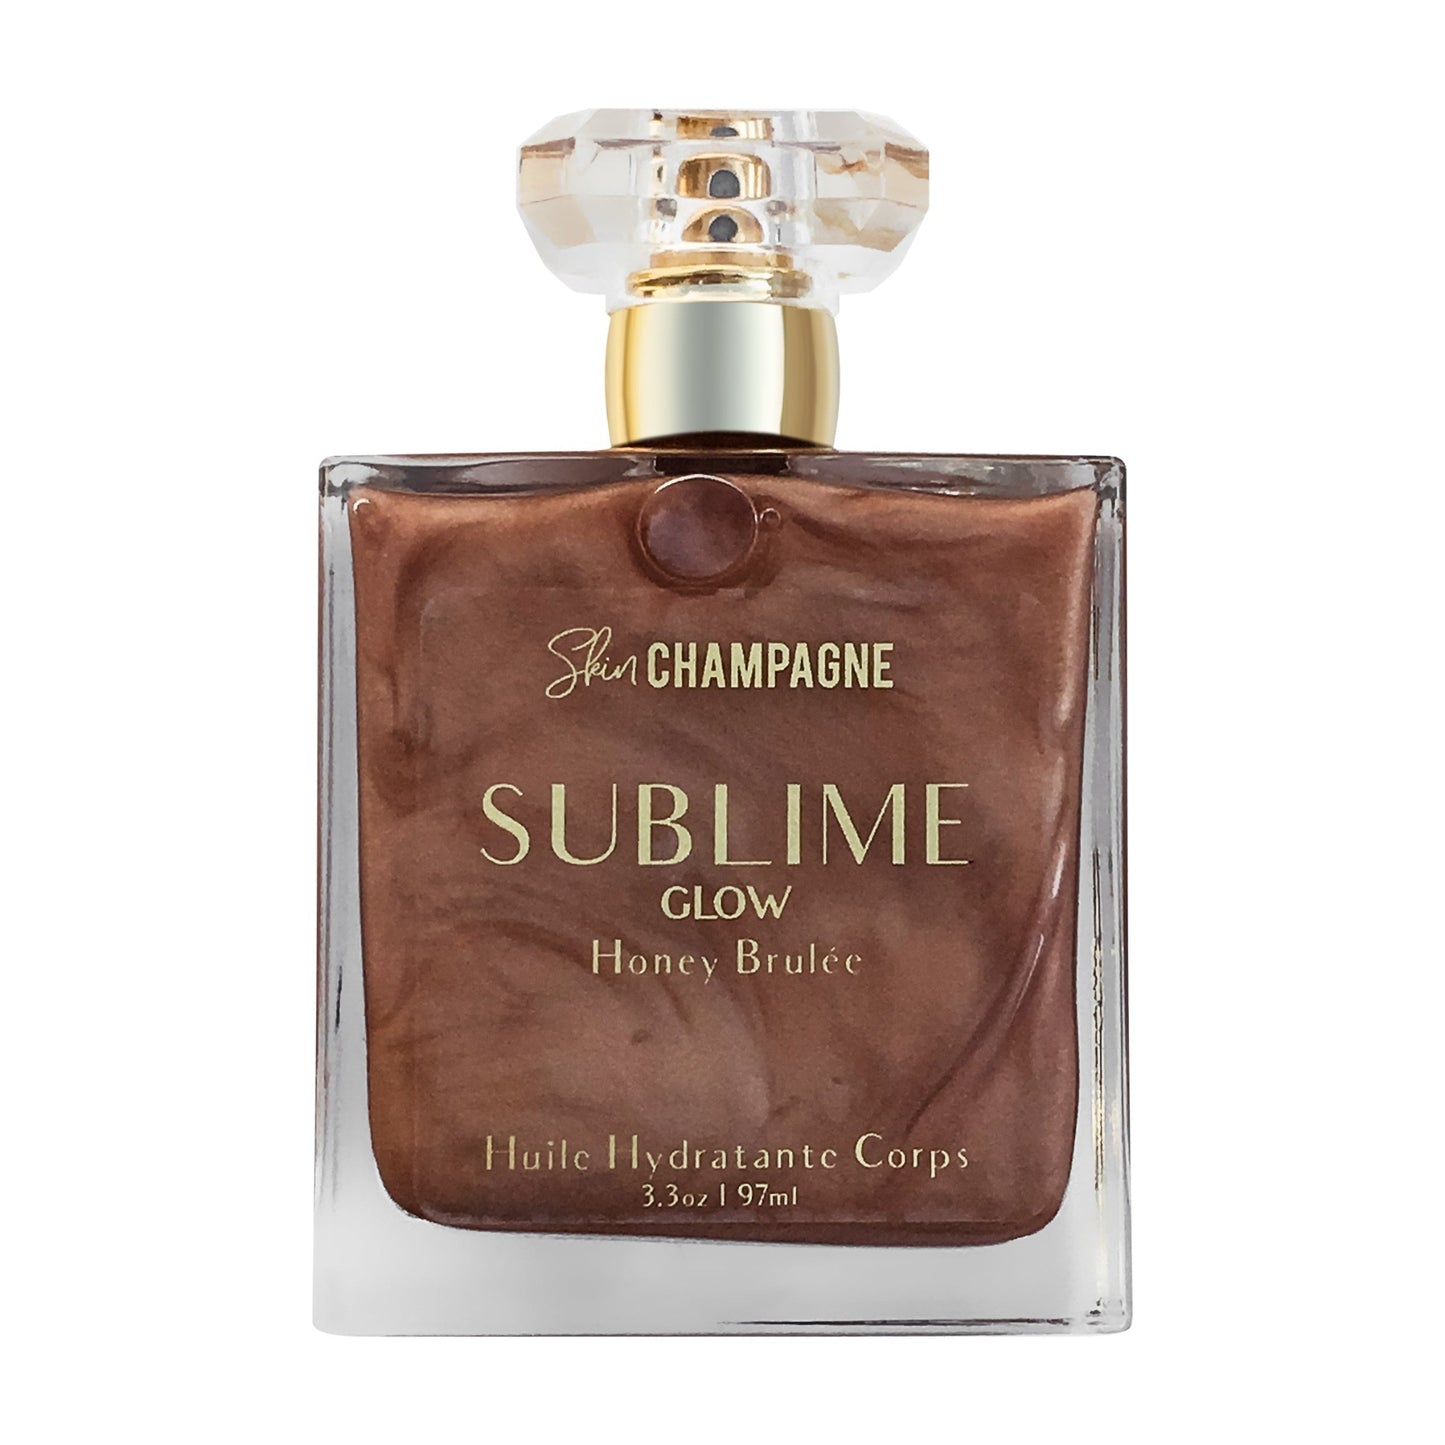 Sublime Glow Body Oil - Honey Brulée - Skin Champagne